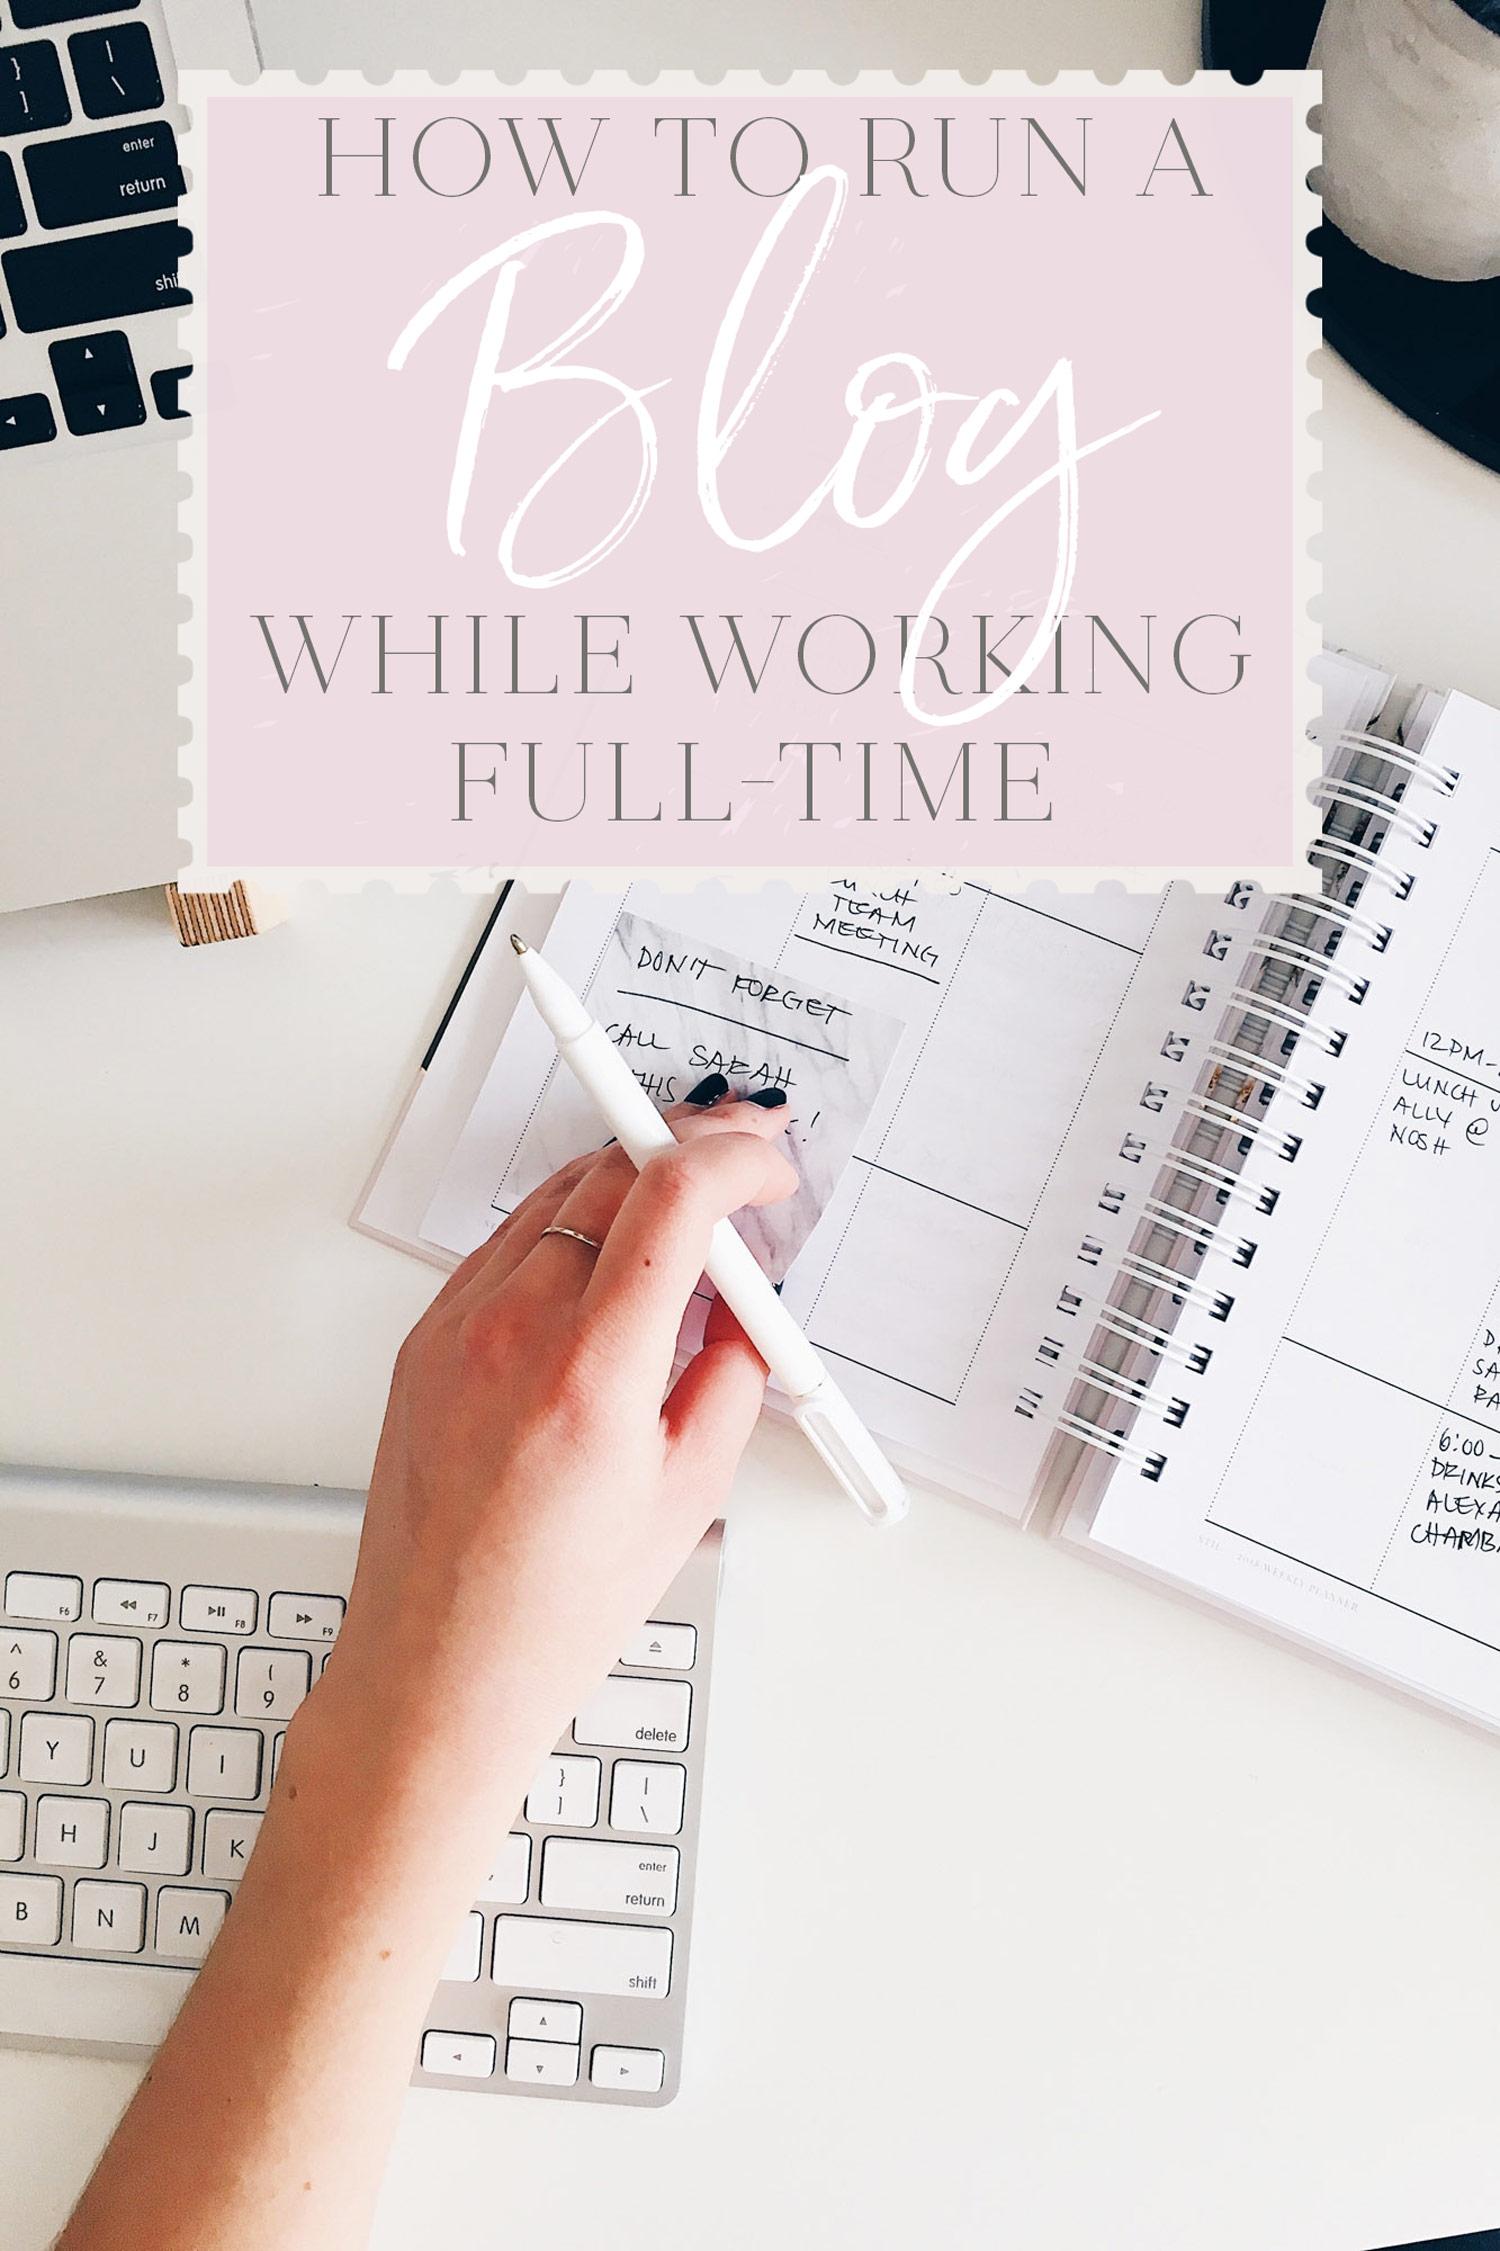 How to Run a Blog While Working Full-Time